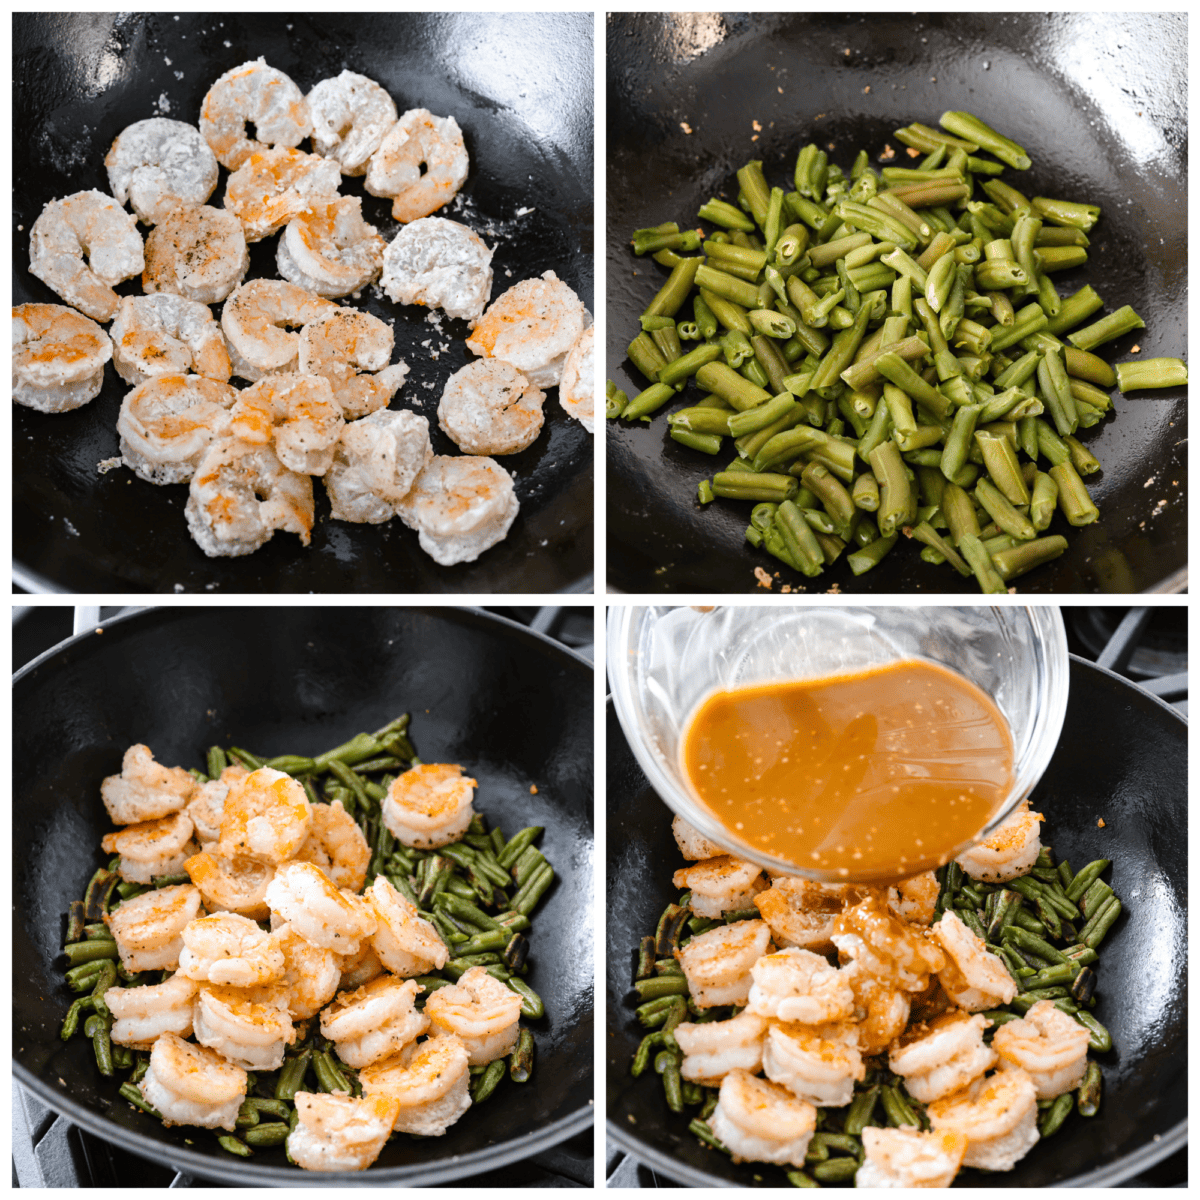 4-photo collage of the shrimp and vegetables being cooked, then tossed in a homemade sauce.